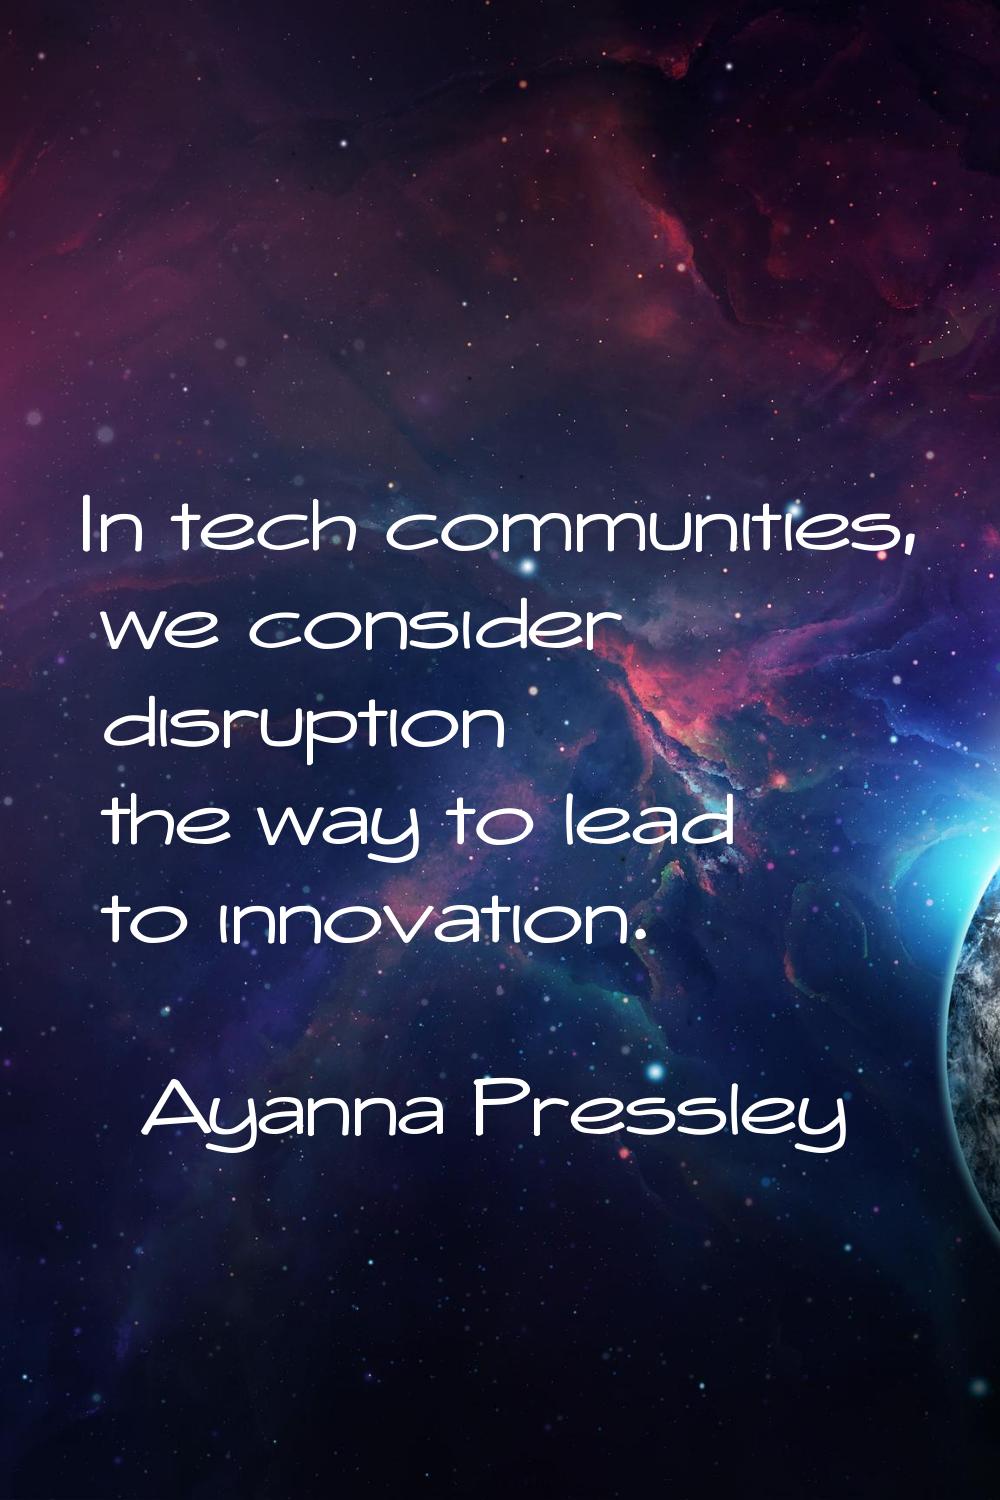 In tech communities, we consider disruption the way to lead to innovation.